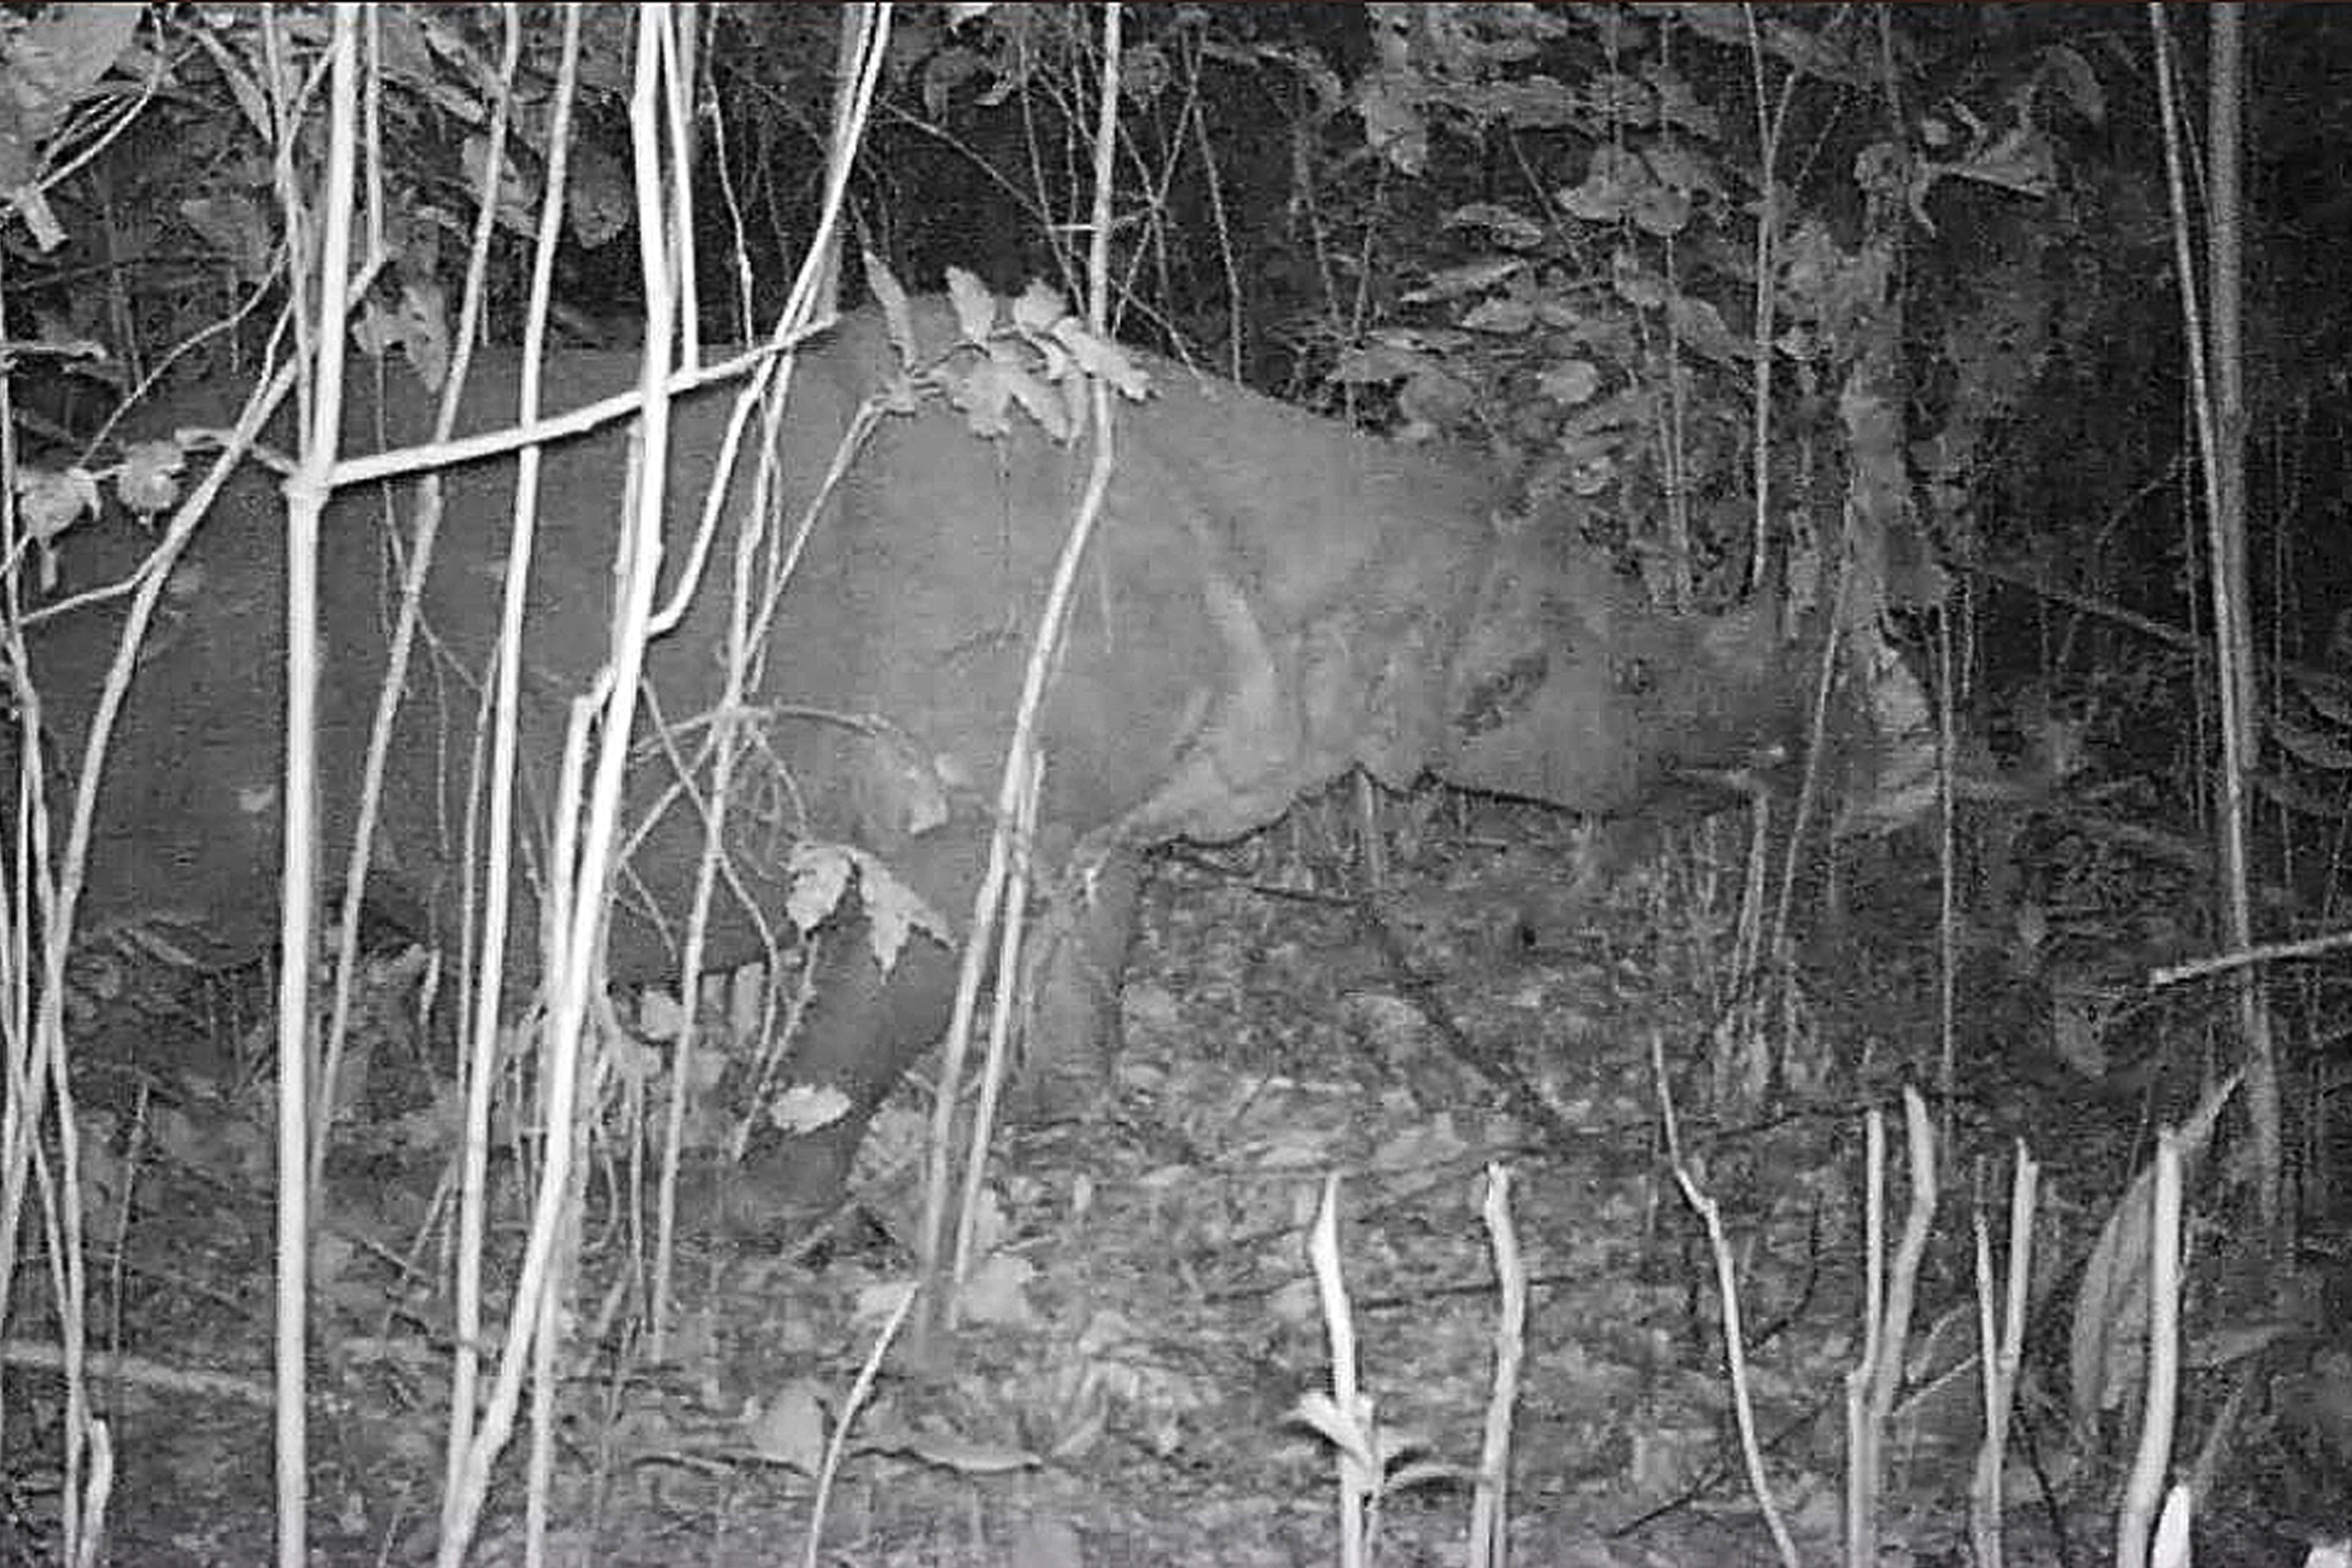 Camera traps allow for more accurate population counting